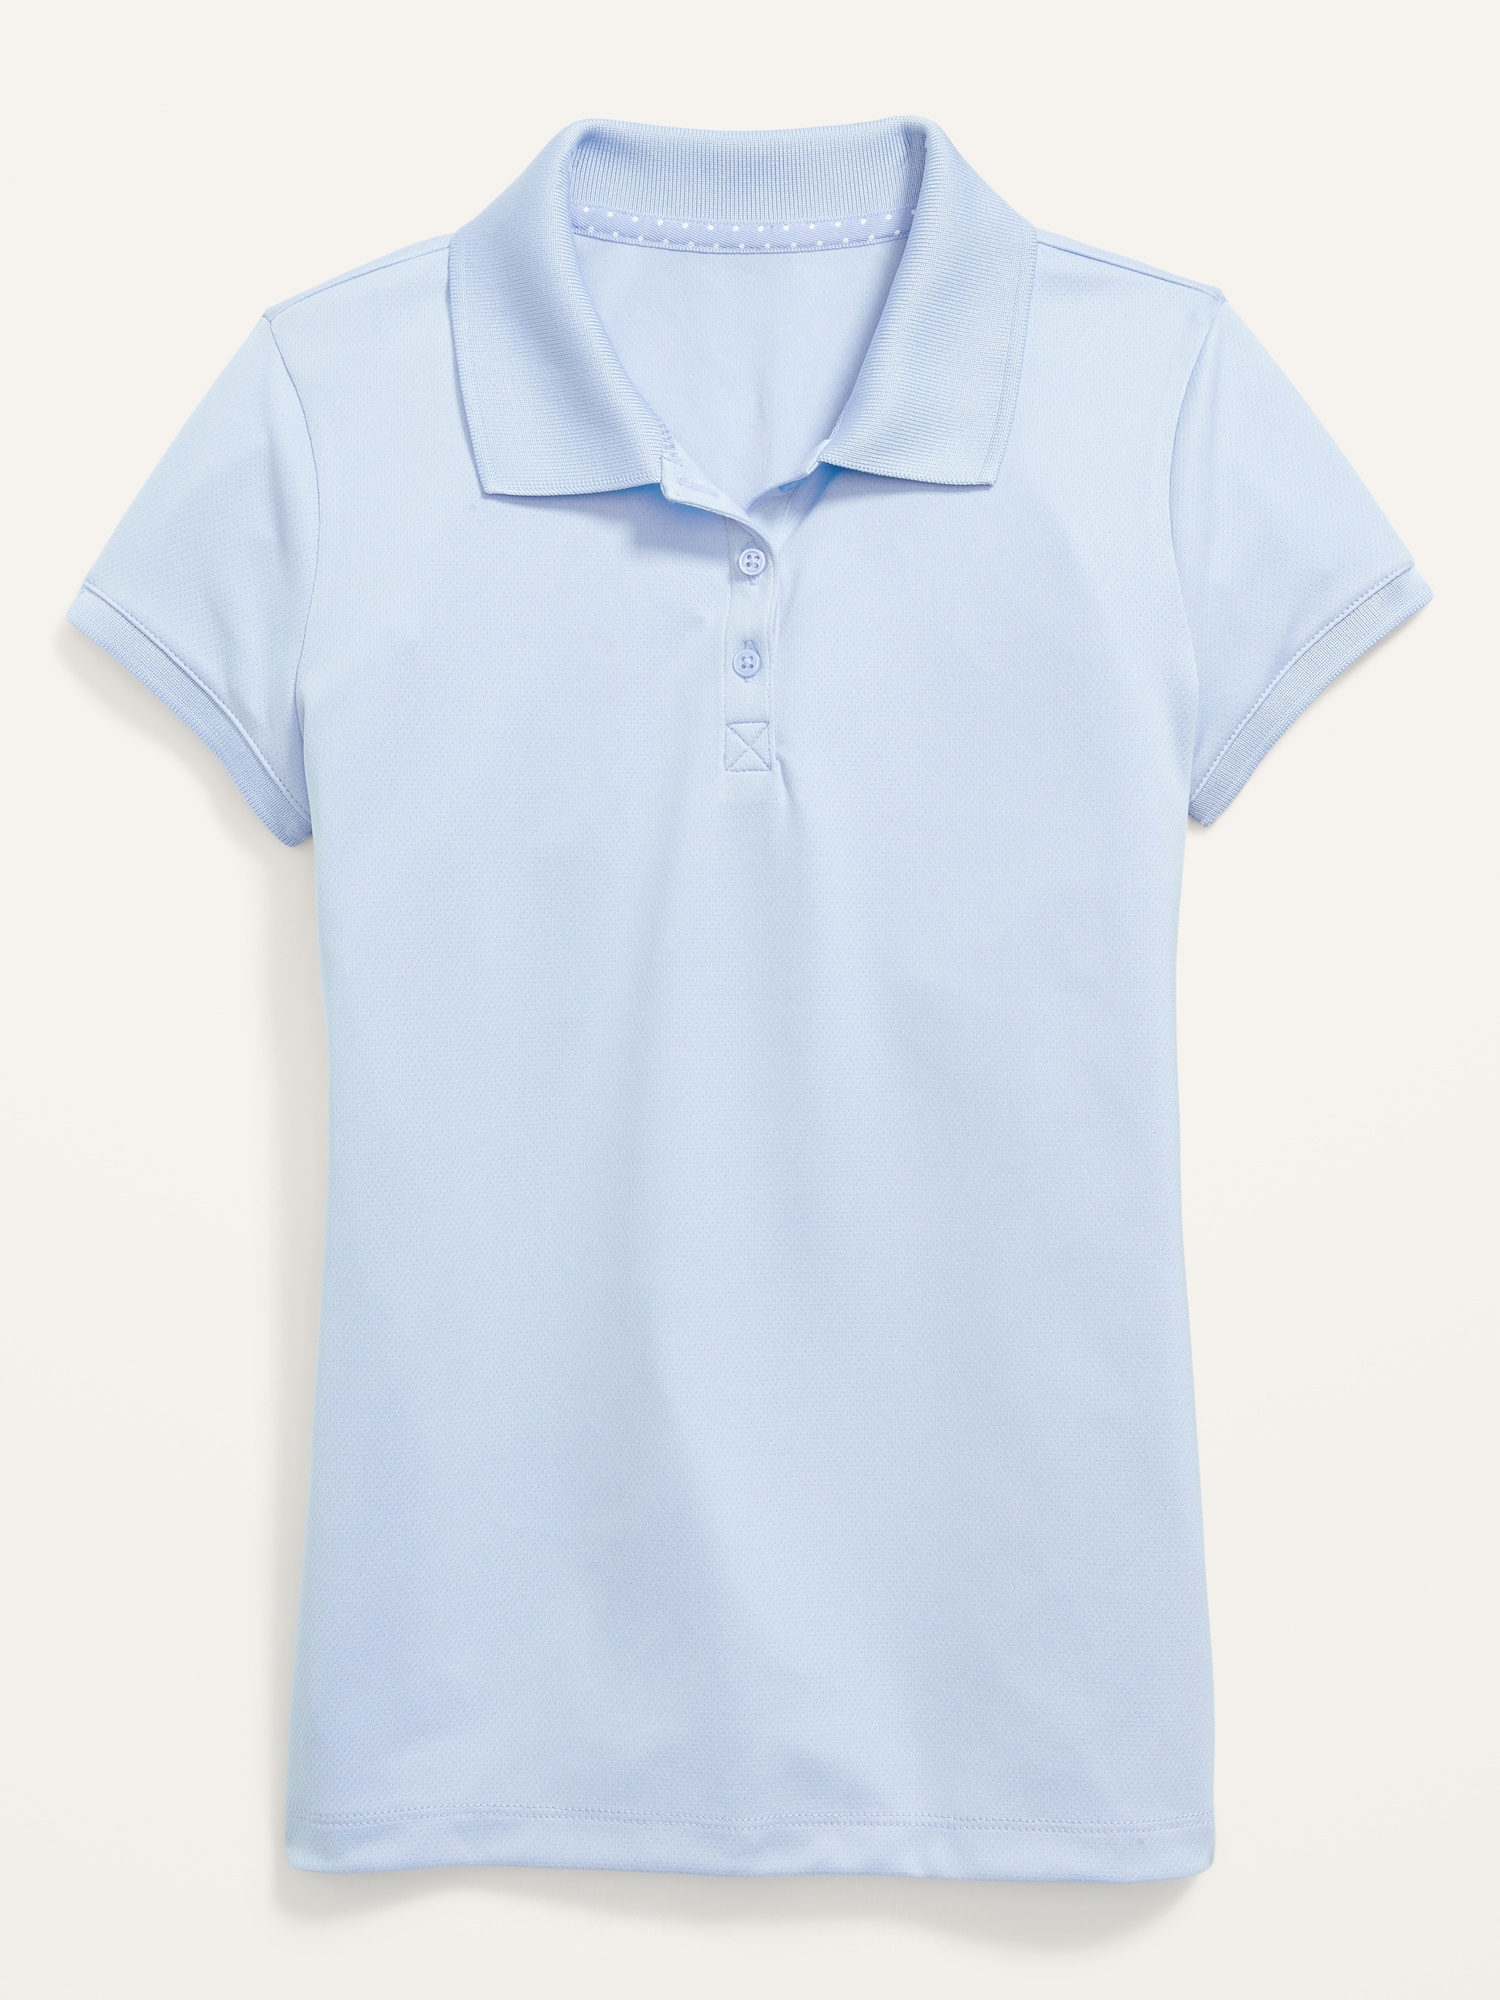 Uniform Moisture-Wicking Polo Shirt for Girls | Old Navy